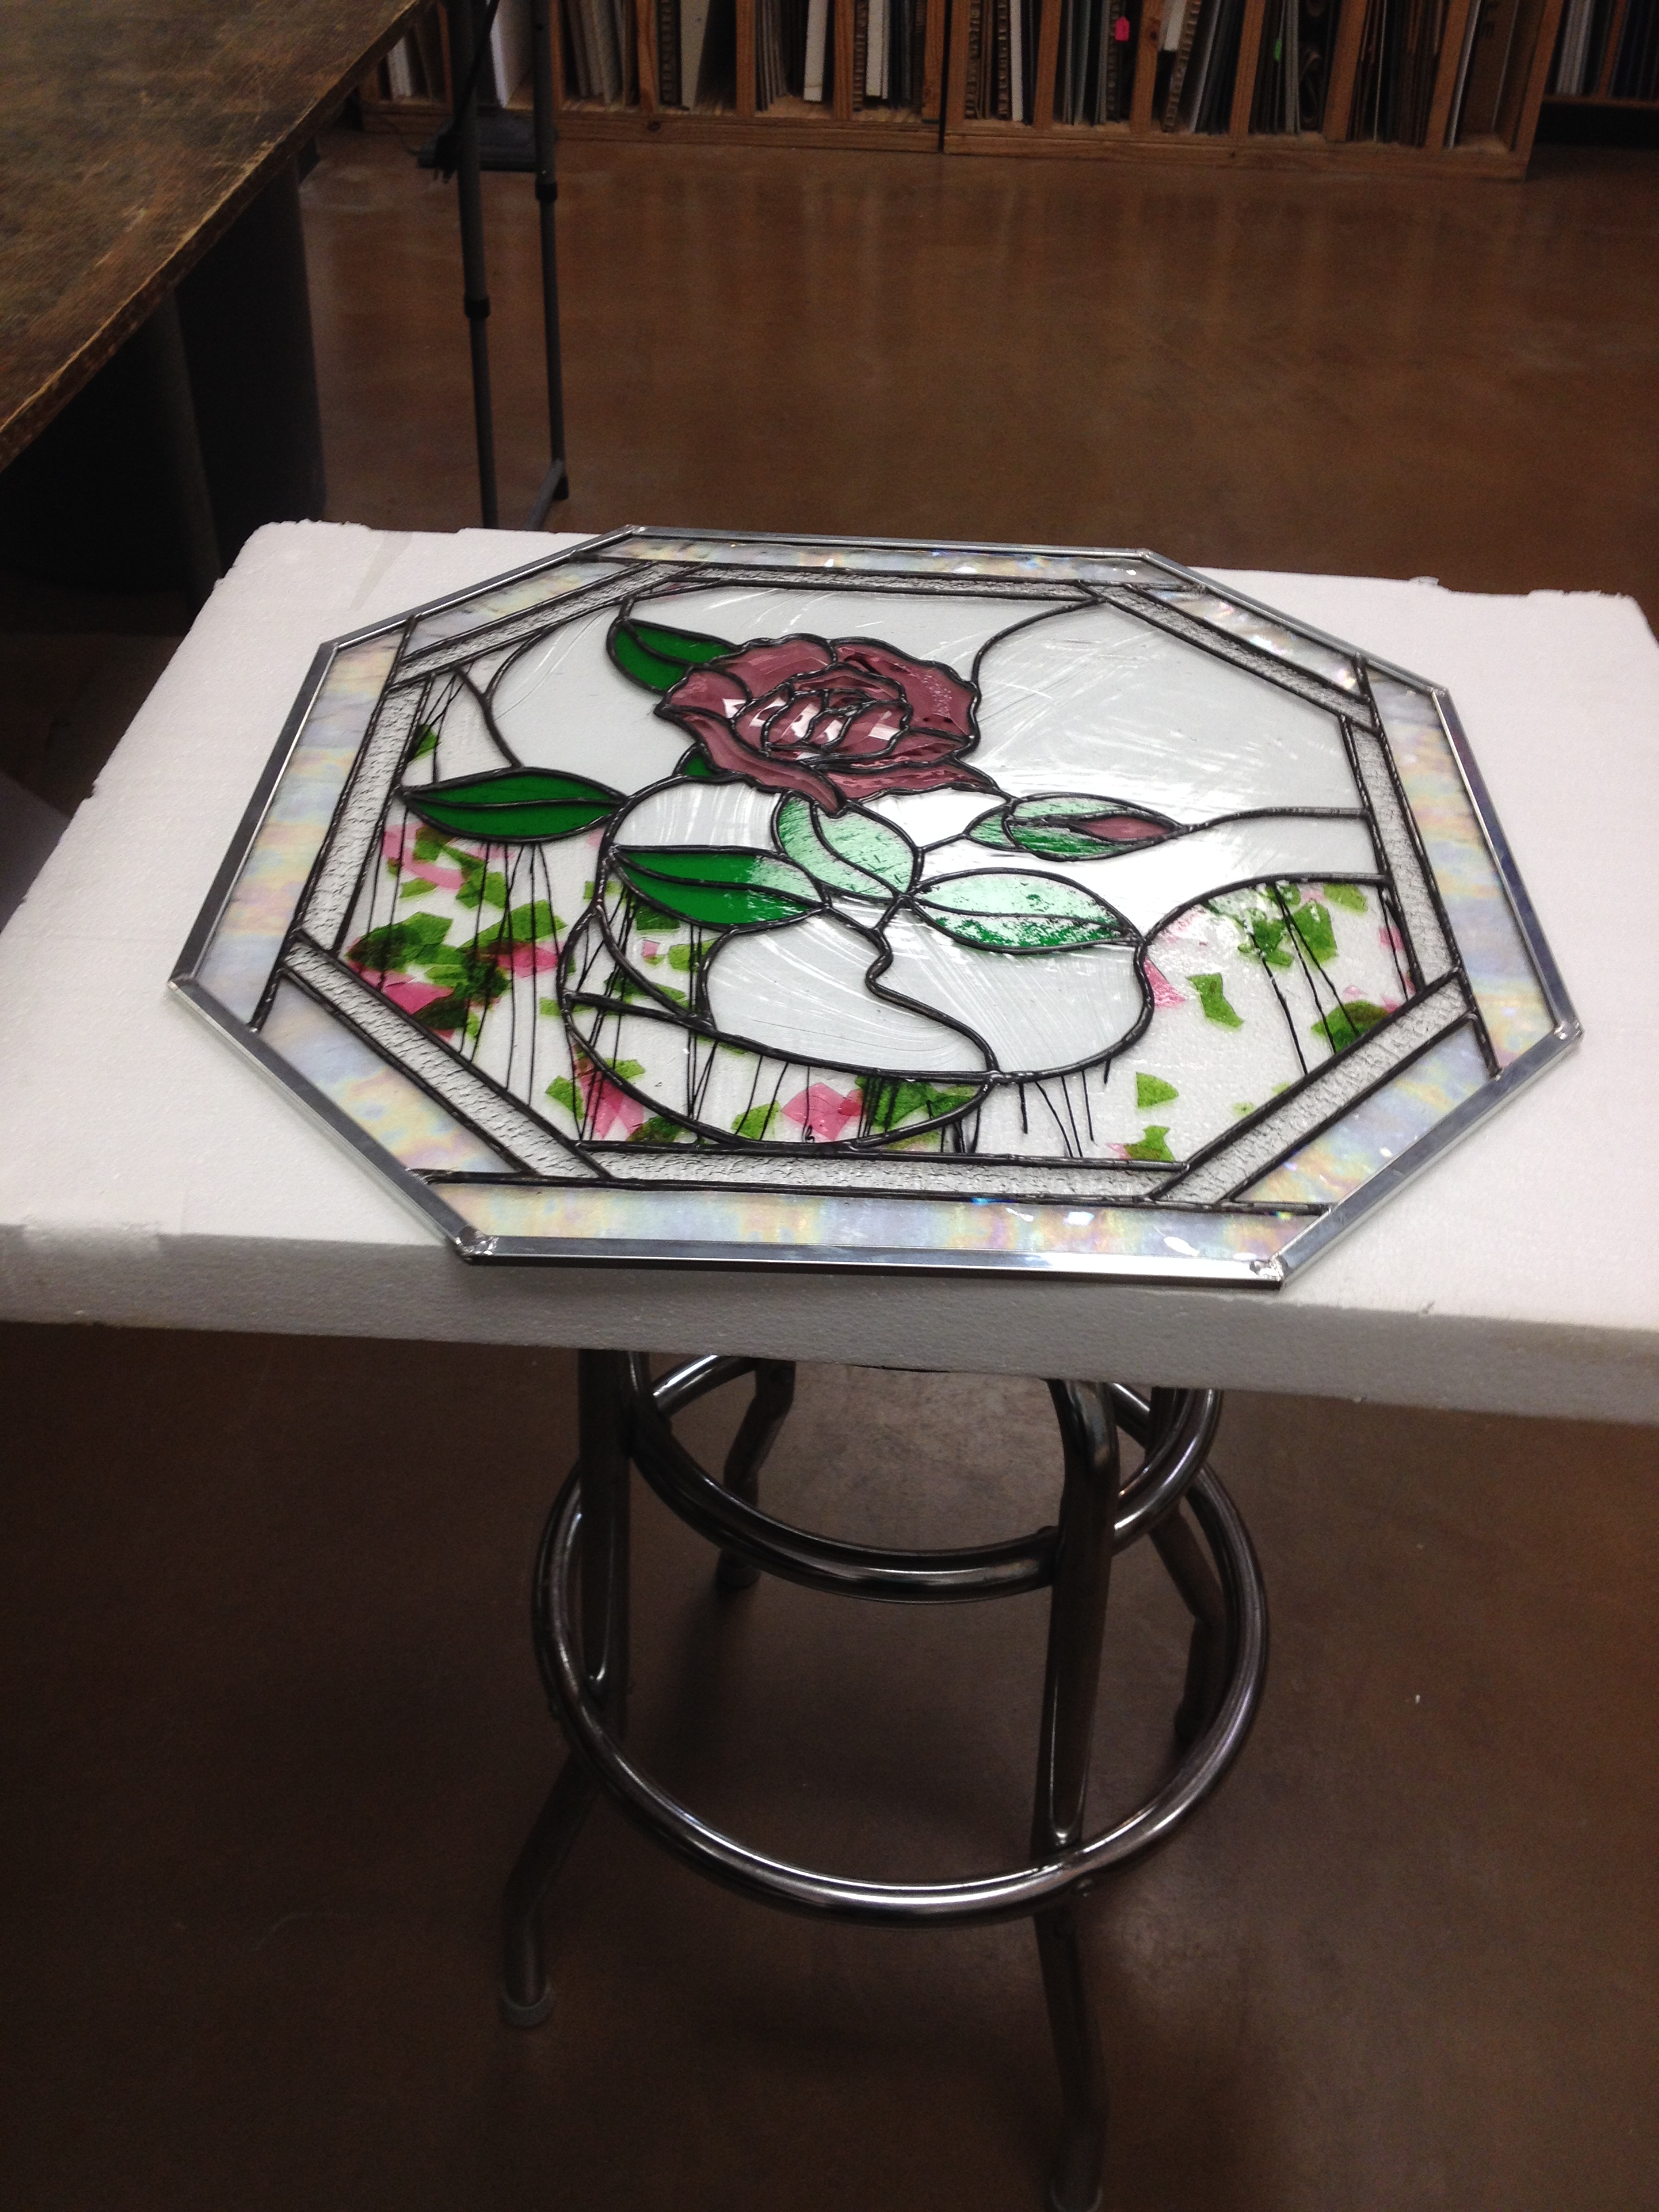 RED ROSE HEX SHAPE STAINEDGLASS PANEL